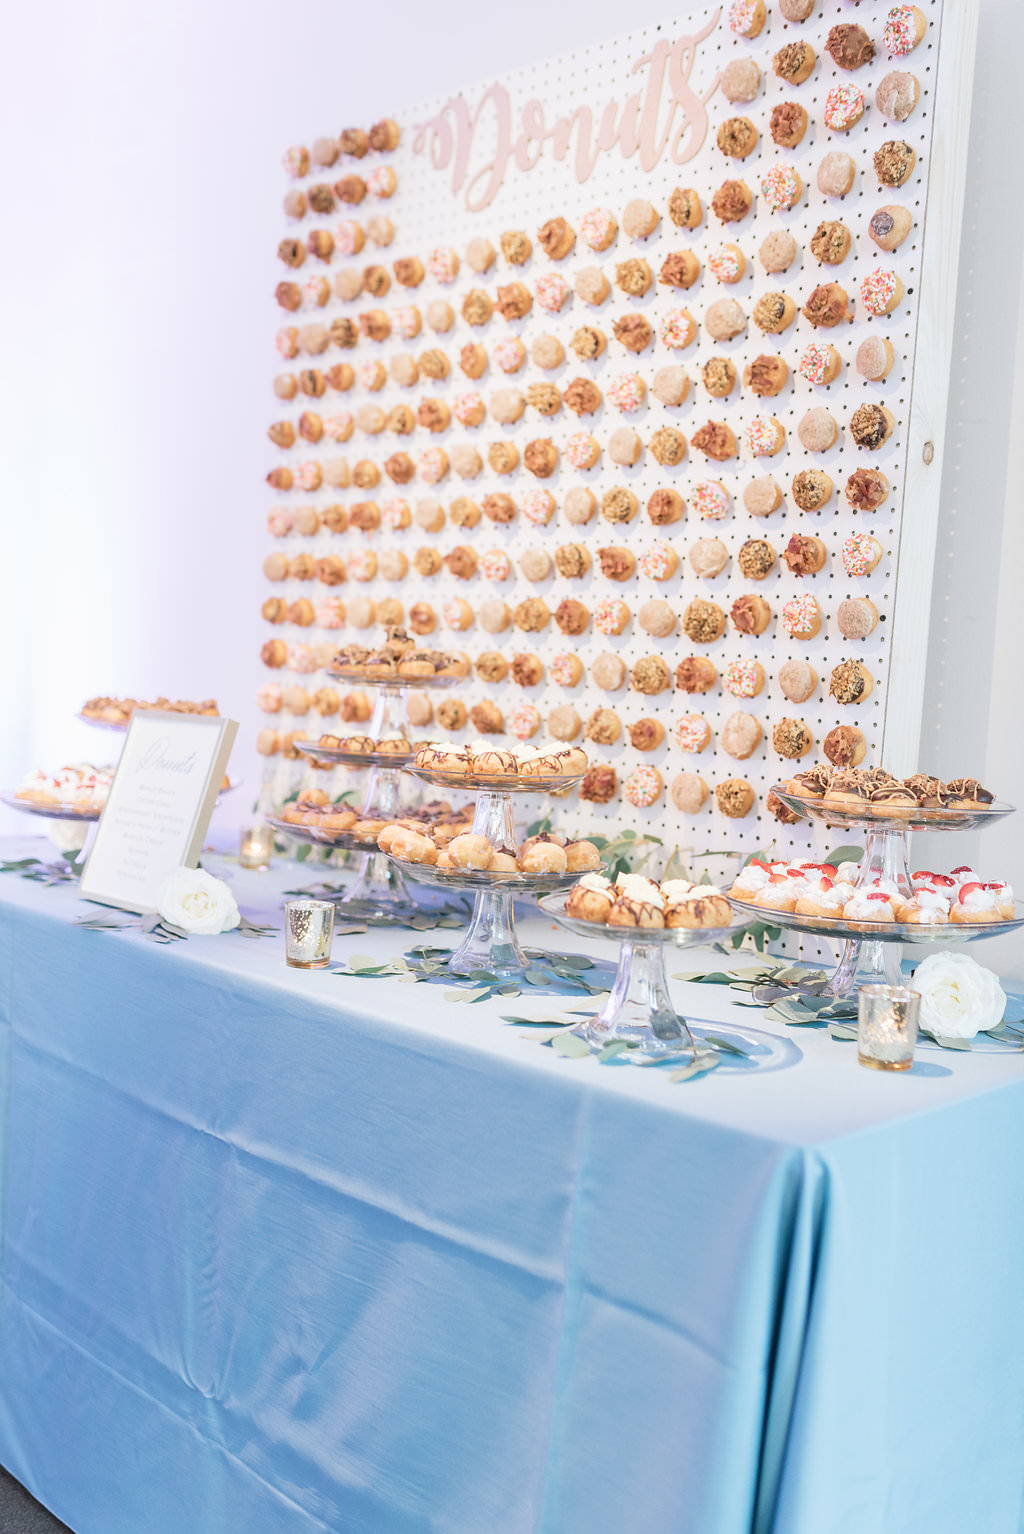 Classic Wedding Reception Decor, Long Dessert Table with Dusty Blue Tablecloth, Donut Wall and Dessert Platters on Glass Stands